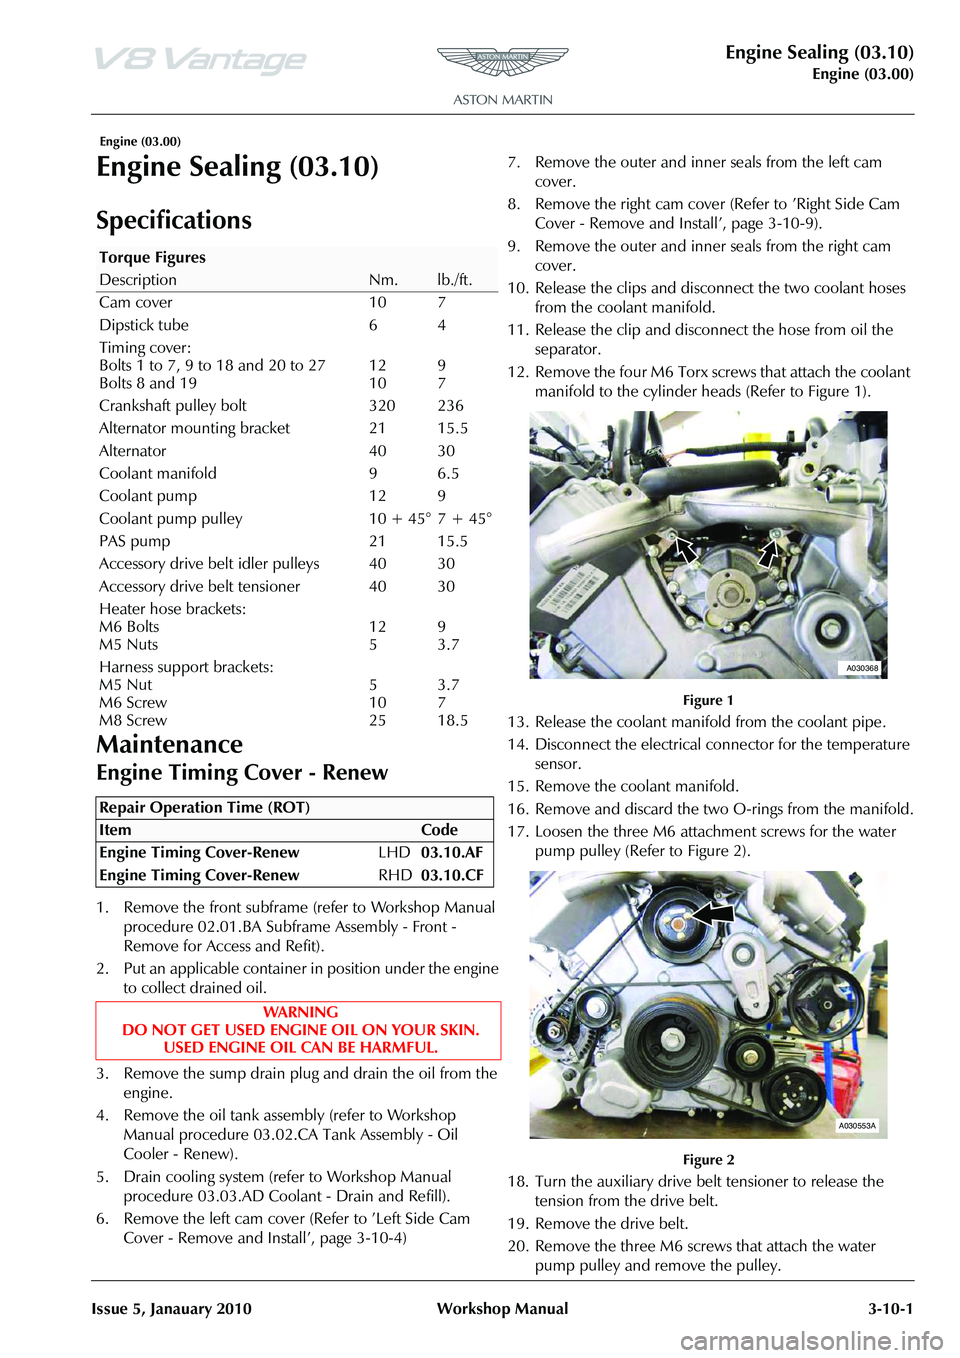 ASTON MARTIN V8 VANTAGE 2010  Workshop Manual Engine Sealing (03.10)
Engine (03.00)
Issue 5, Janauary 2010 Workshop Manual 3-10-1
 Engine (03.00)
Engine Sealing (03.10)
Specifications
Maintenance
Engine Timing Cover - Renew
1. Remove the front su